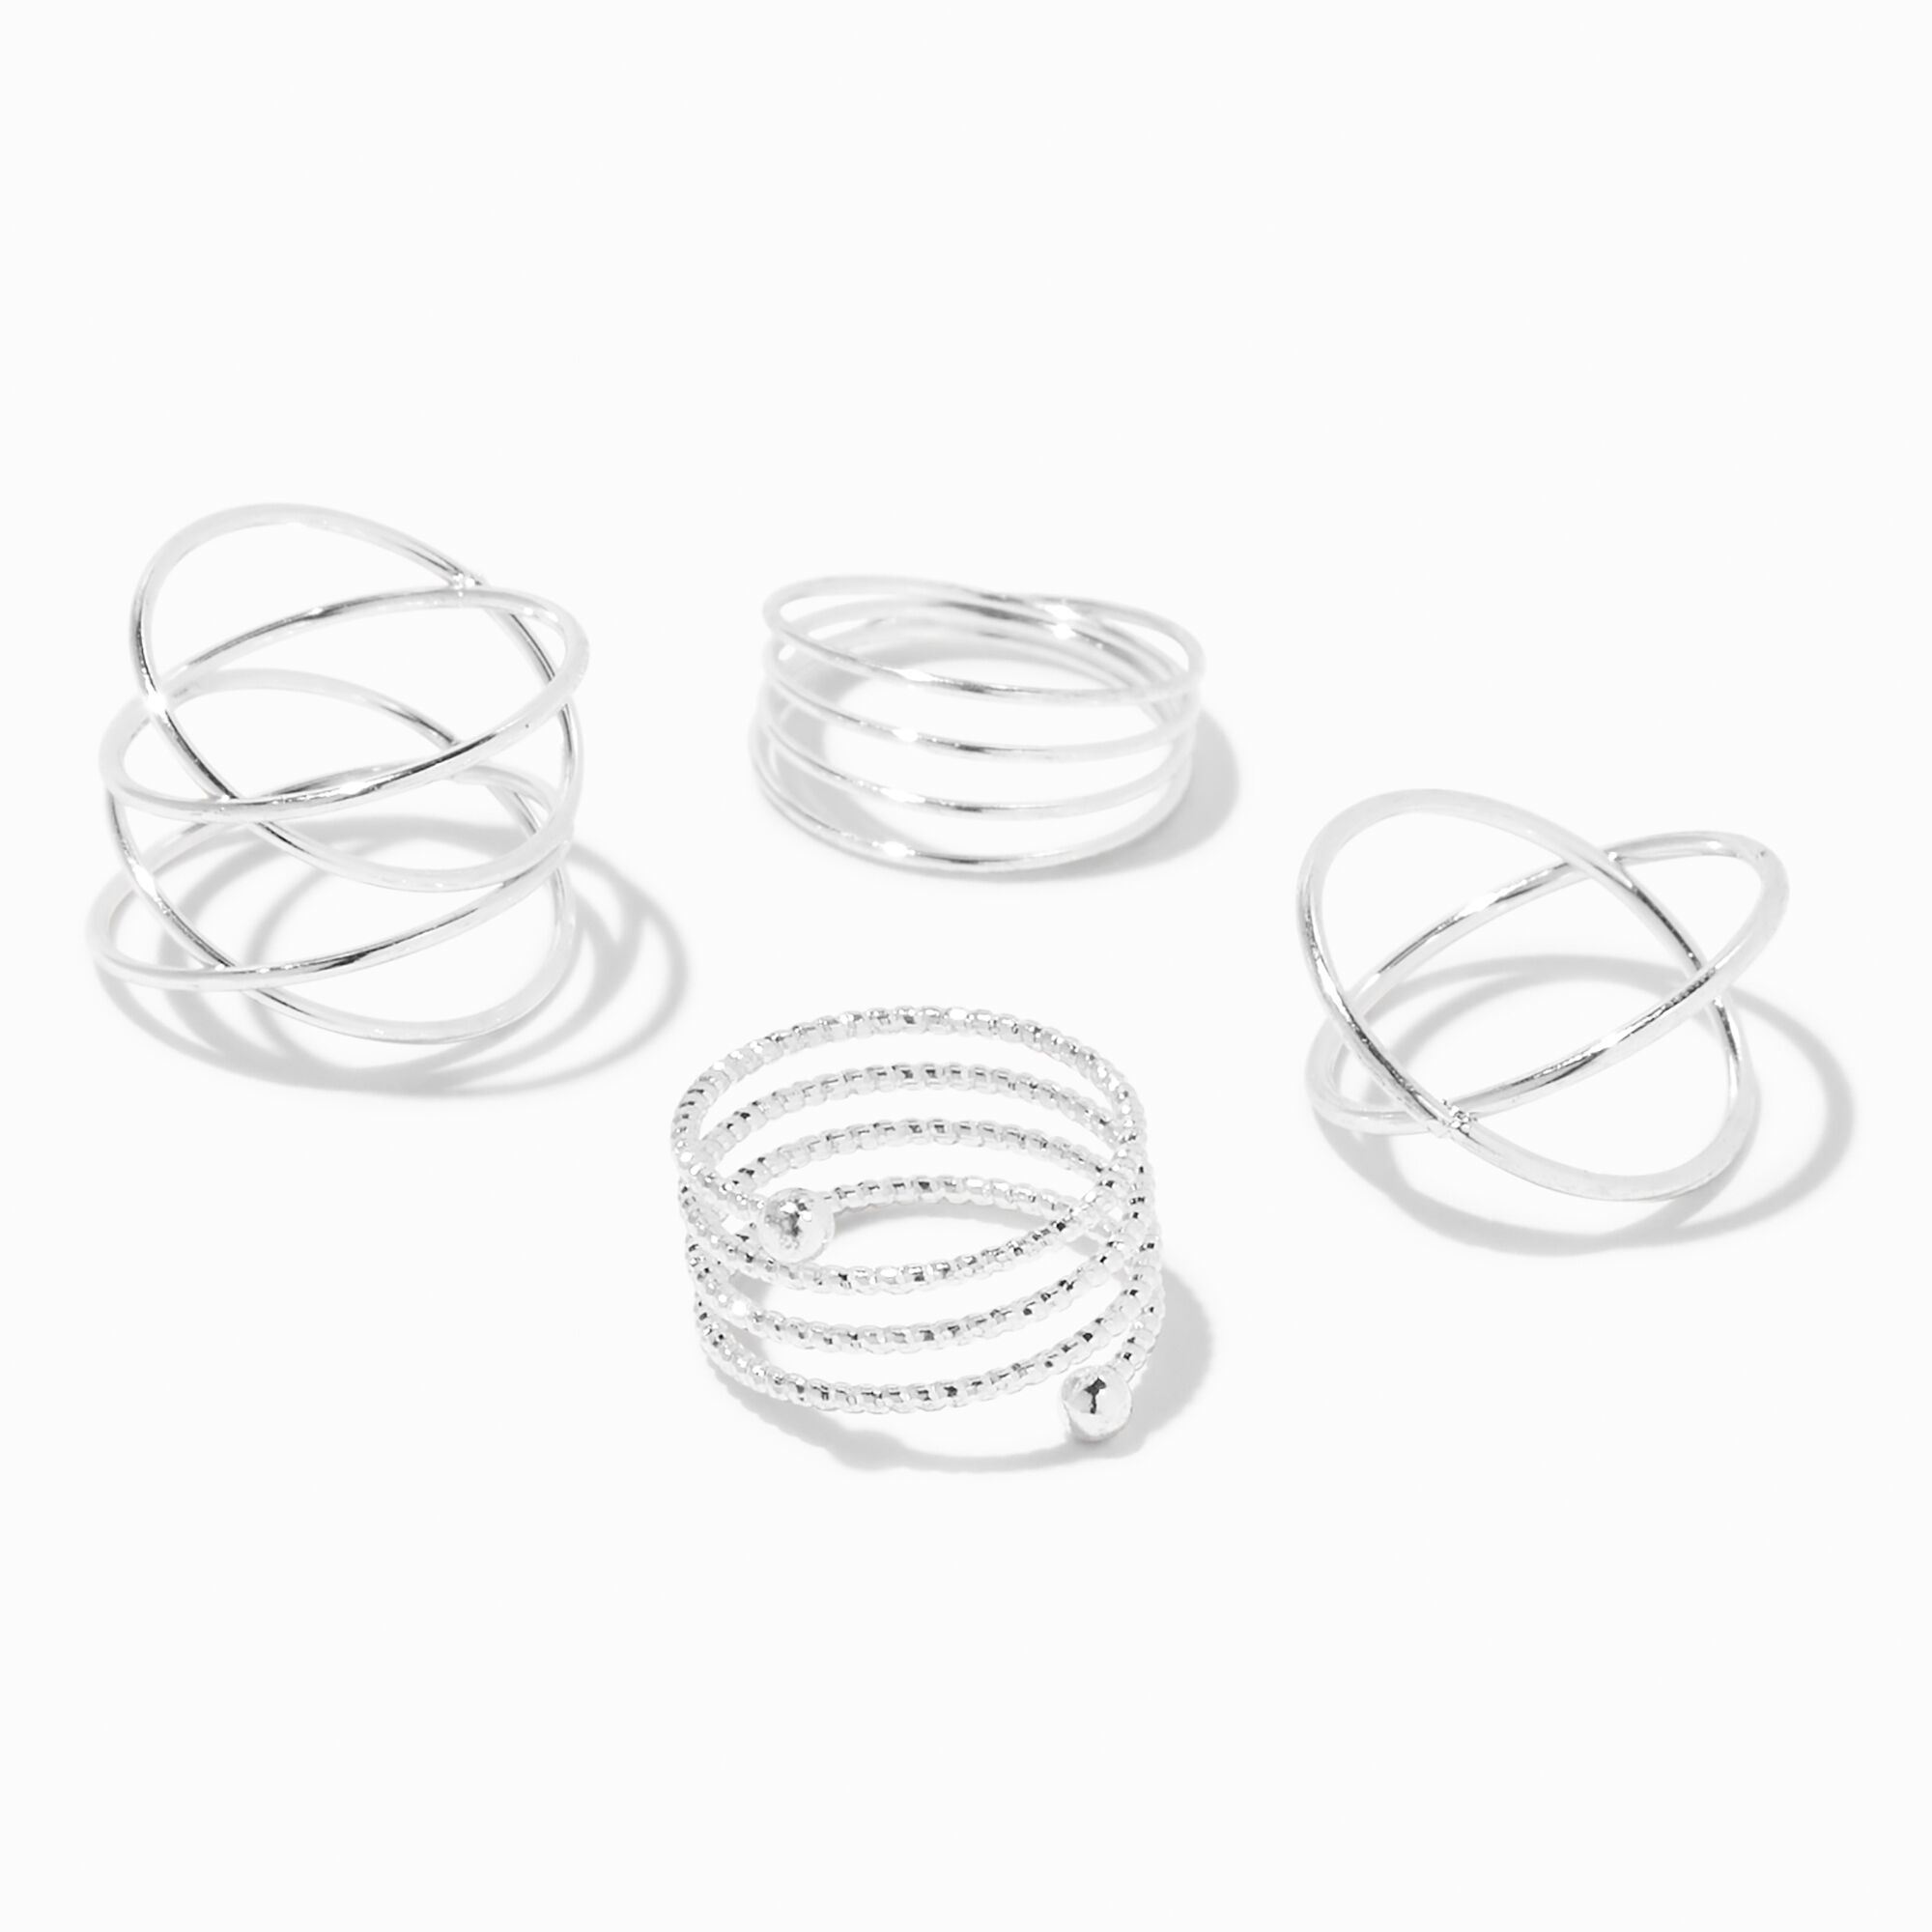 View Claires Spiral Rings 4 Pack Silver information